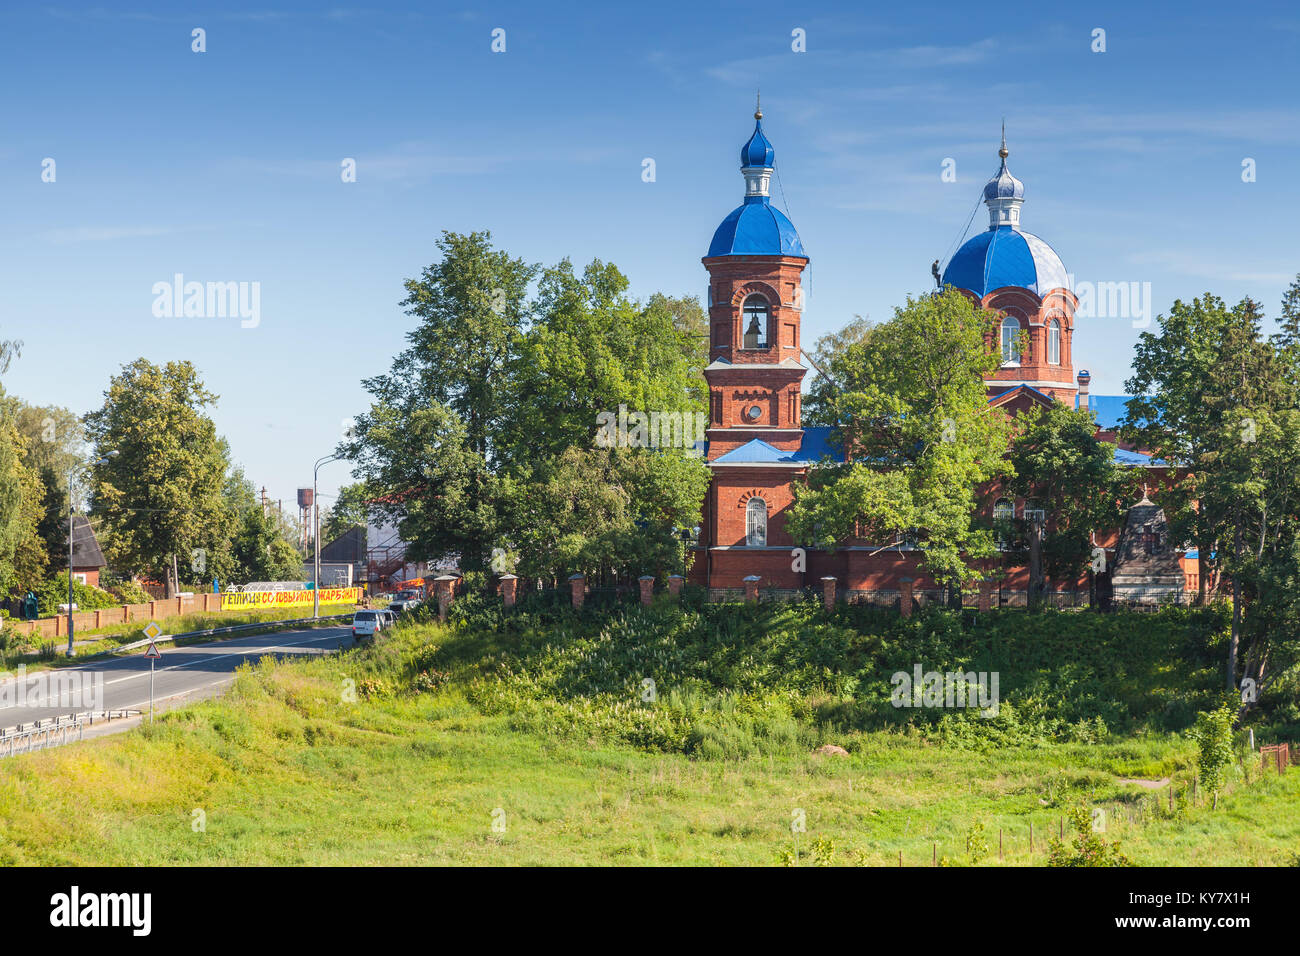 Rozhdestveno, Russia - July 11, 2014: Church of the Nativity of the Blessed Virgin Mary on summer day, worker is on the roof Stock Photo